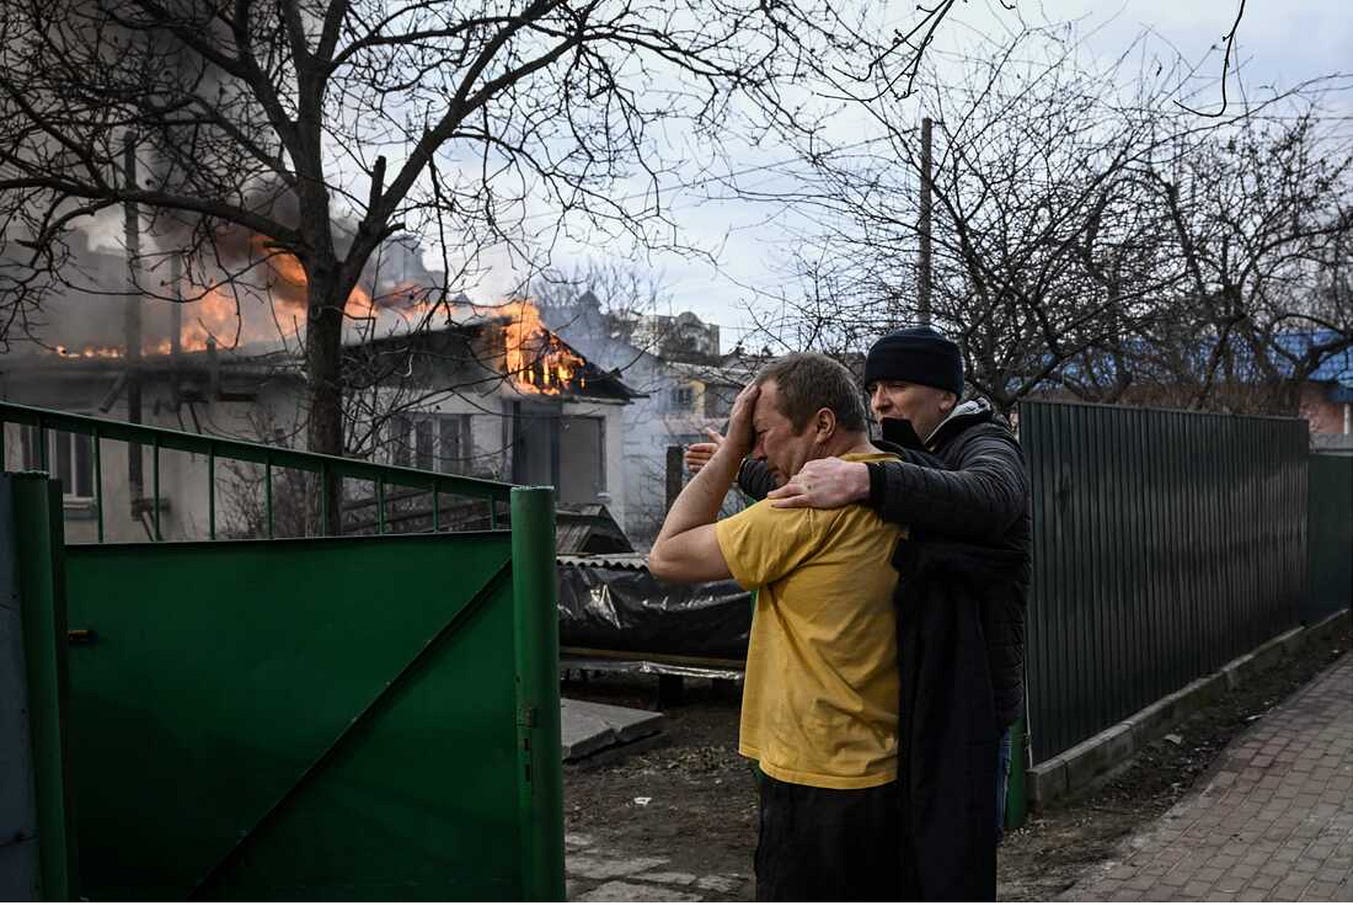 Ukraine tragedy reveals what we already knew: not all lives are treated equally